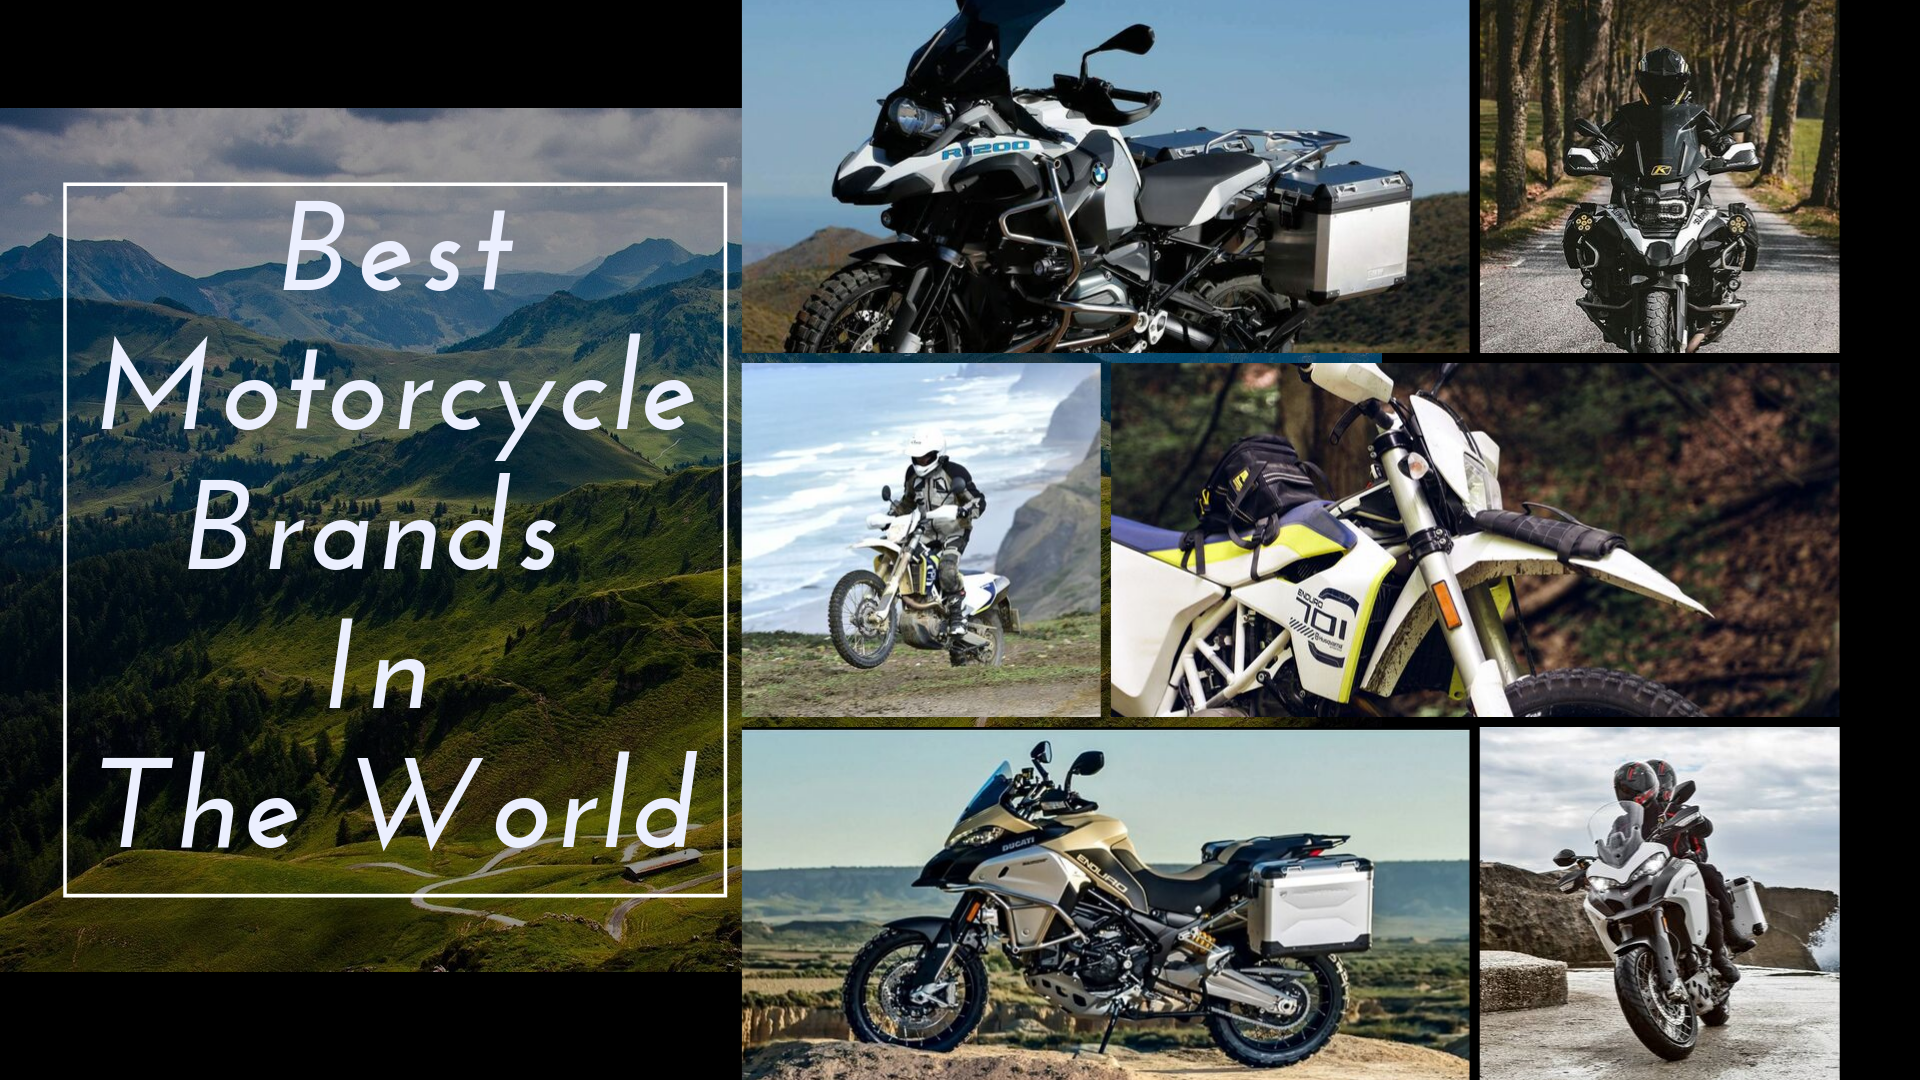 beta rr 50 used – Search for your used motorcycle on the parking motorcycles